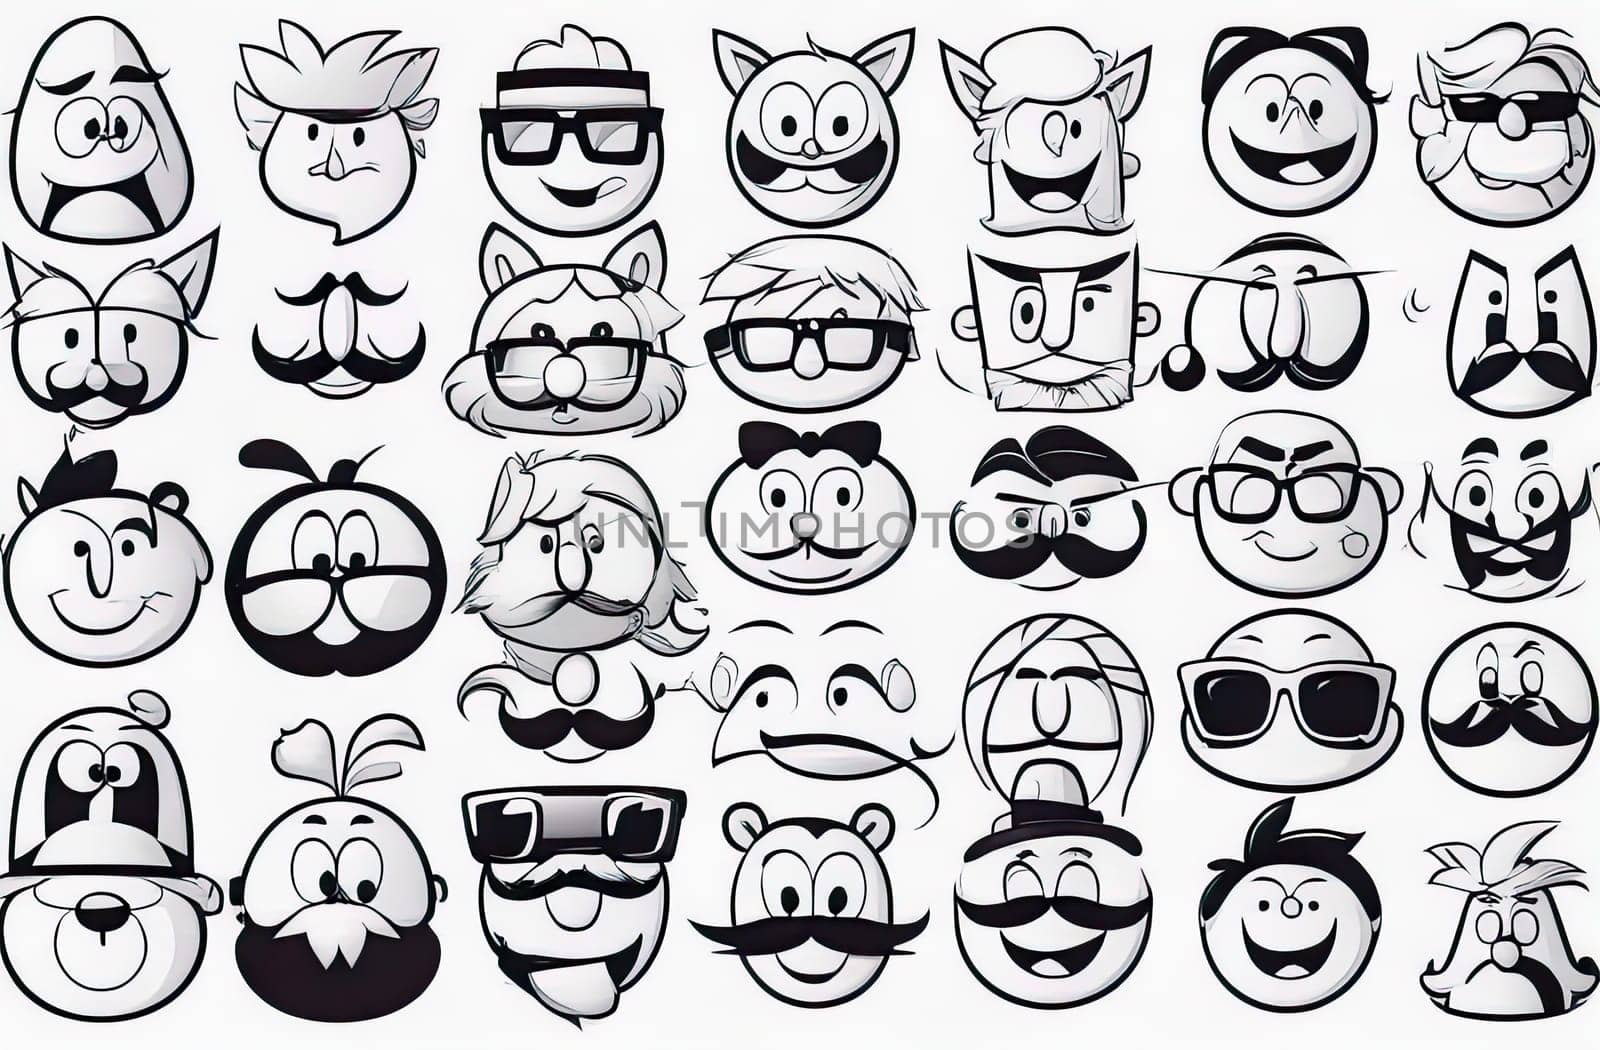 Funny Cartoon Faces Stickers. Colorful crumpled adhesive notes with smiling faces.